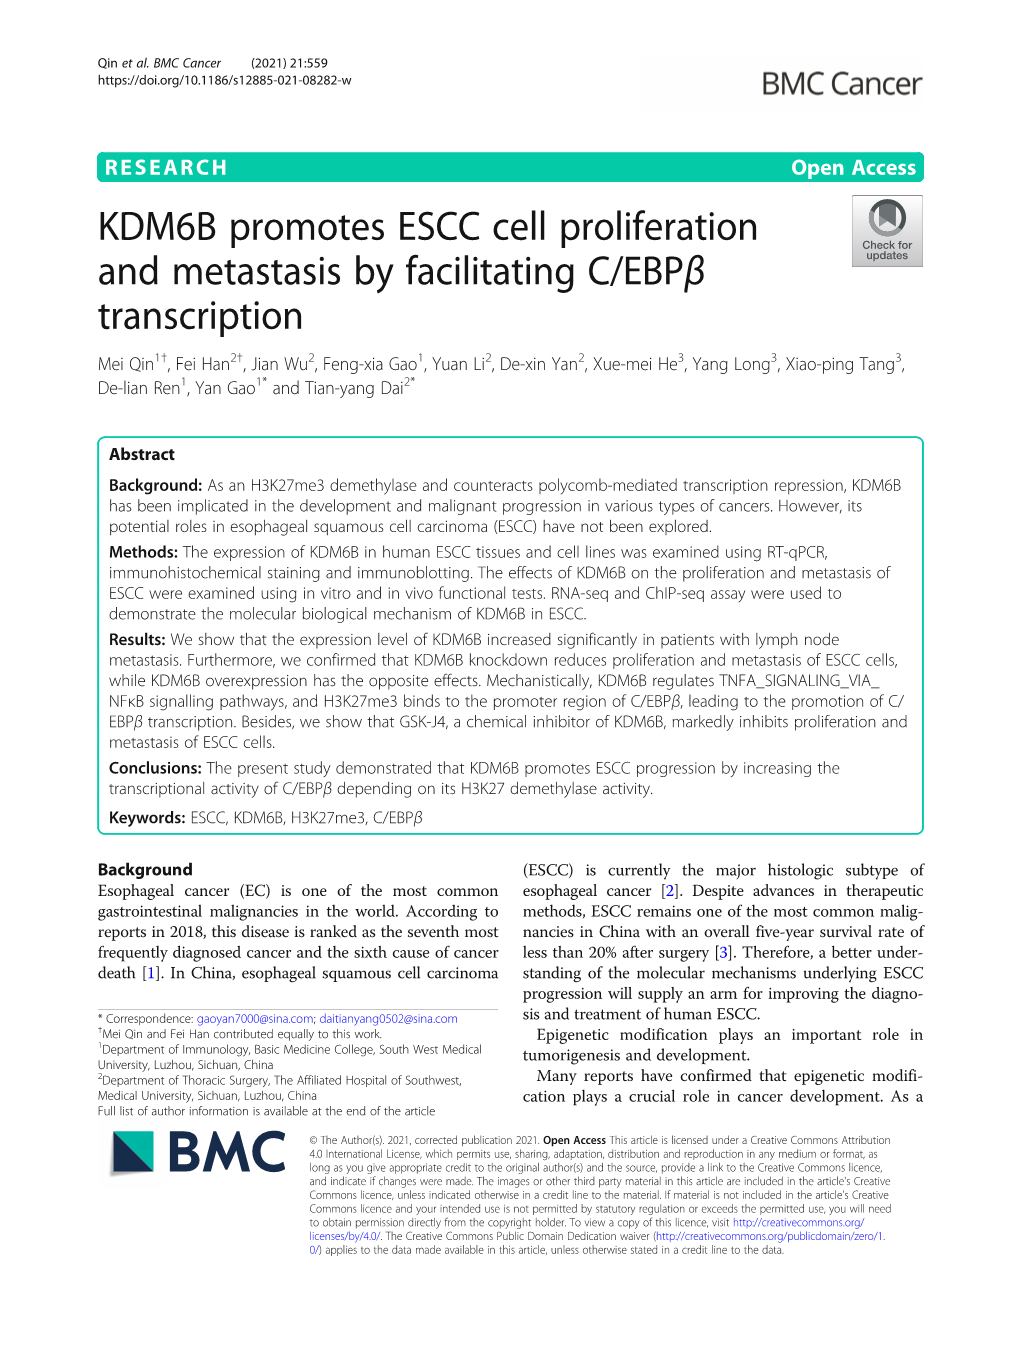 KDM6B Promotes ESCC Cell Proliferation and Metastasis By